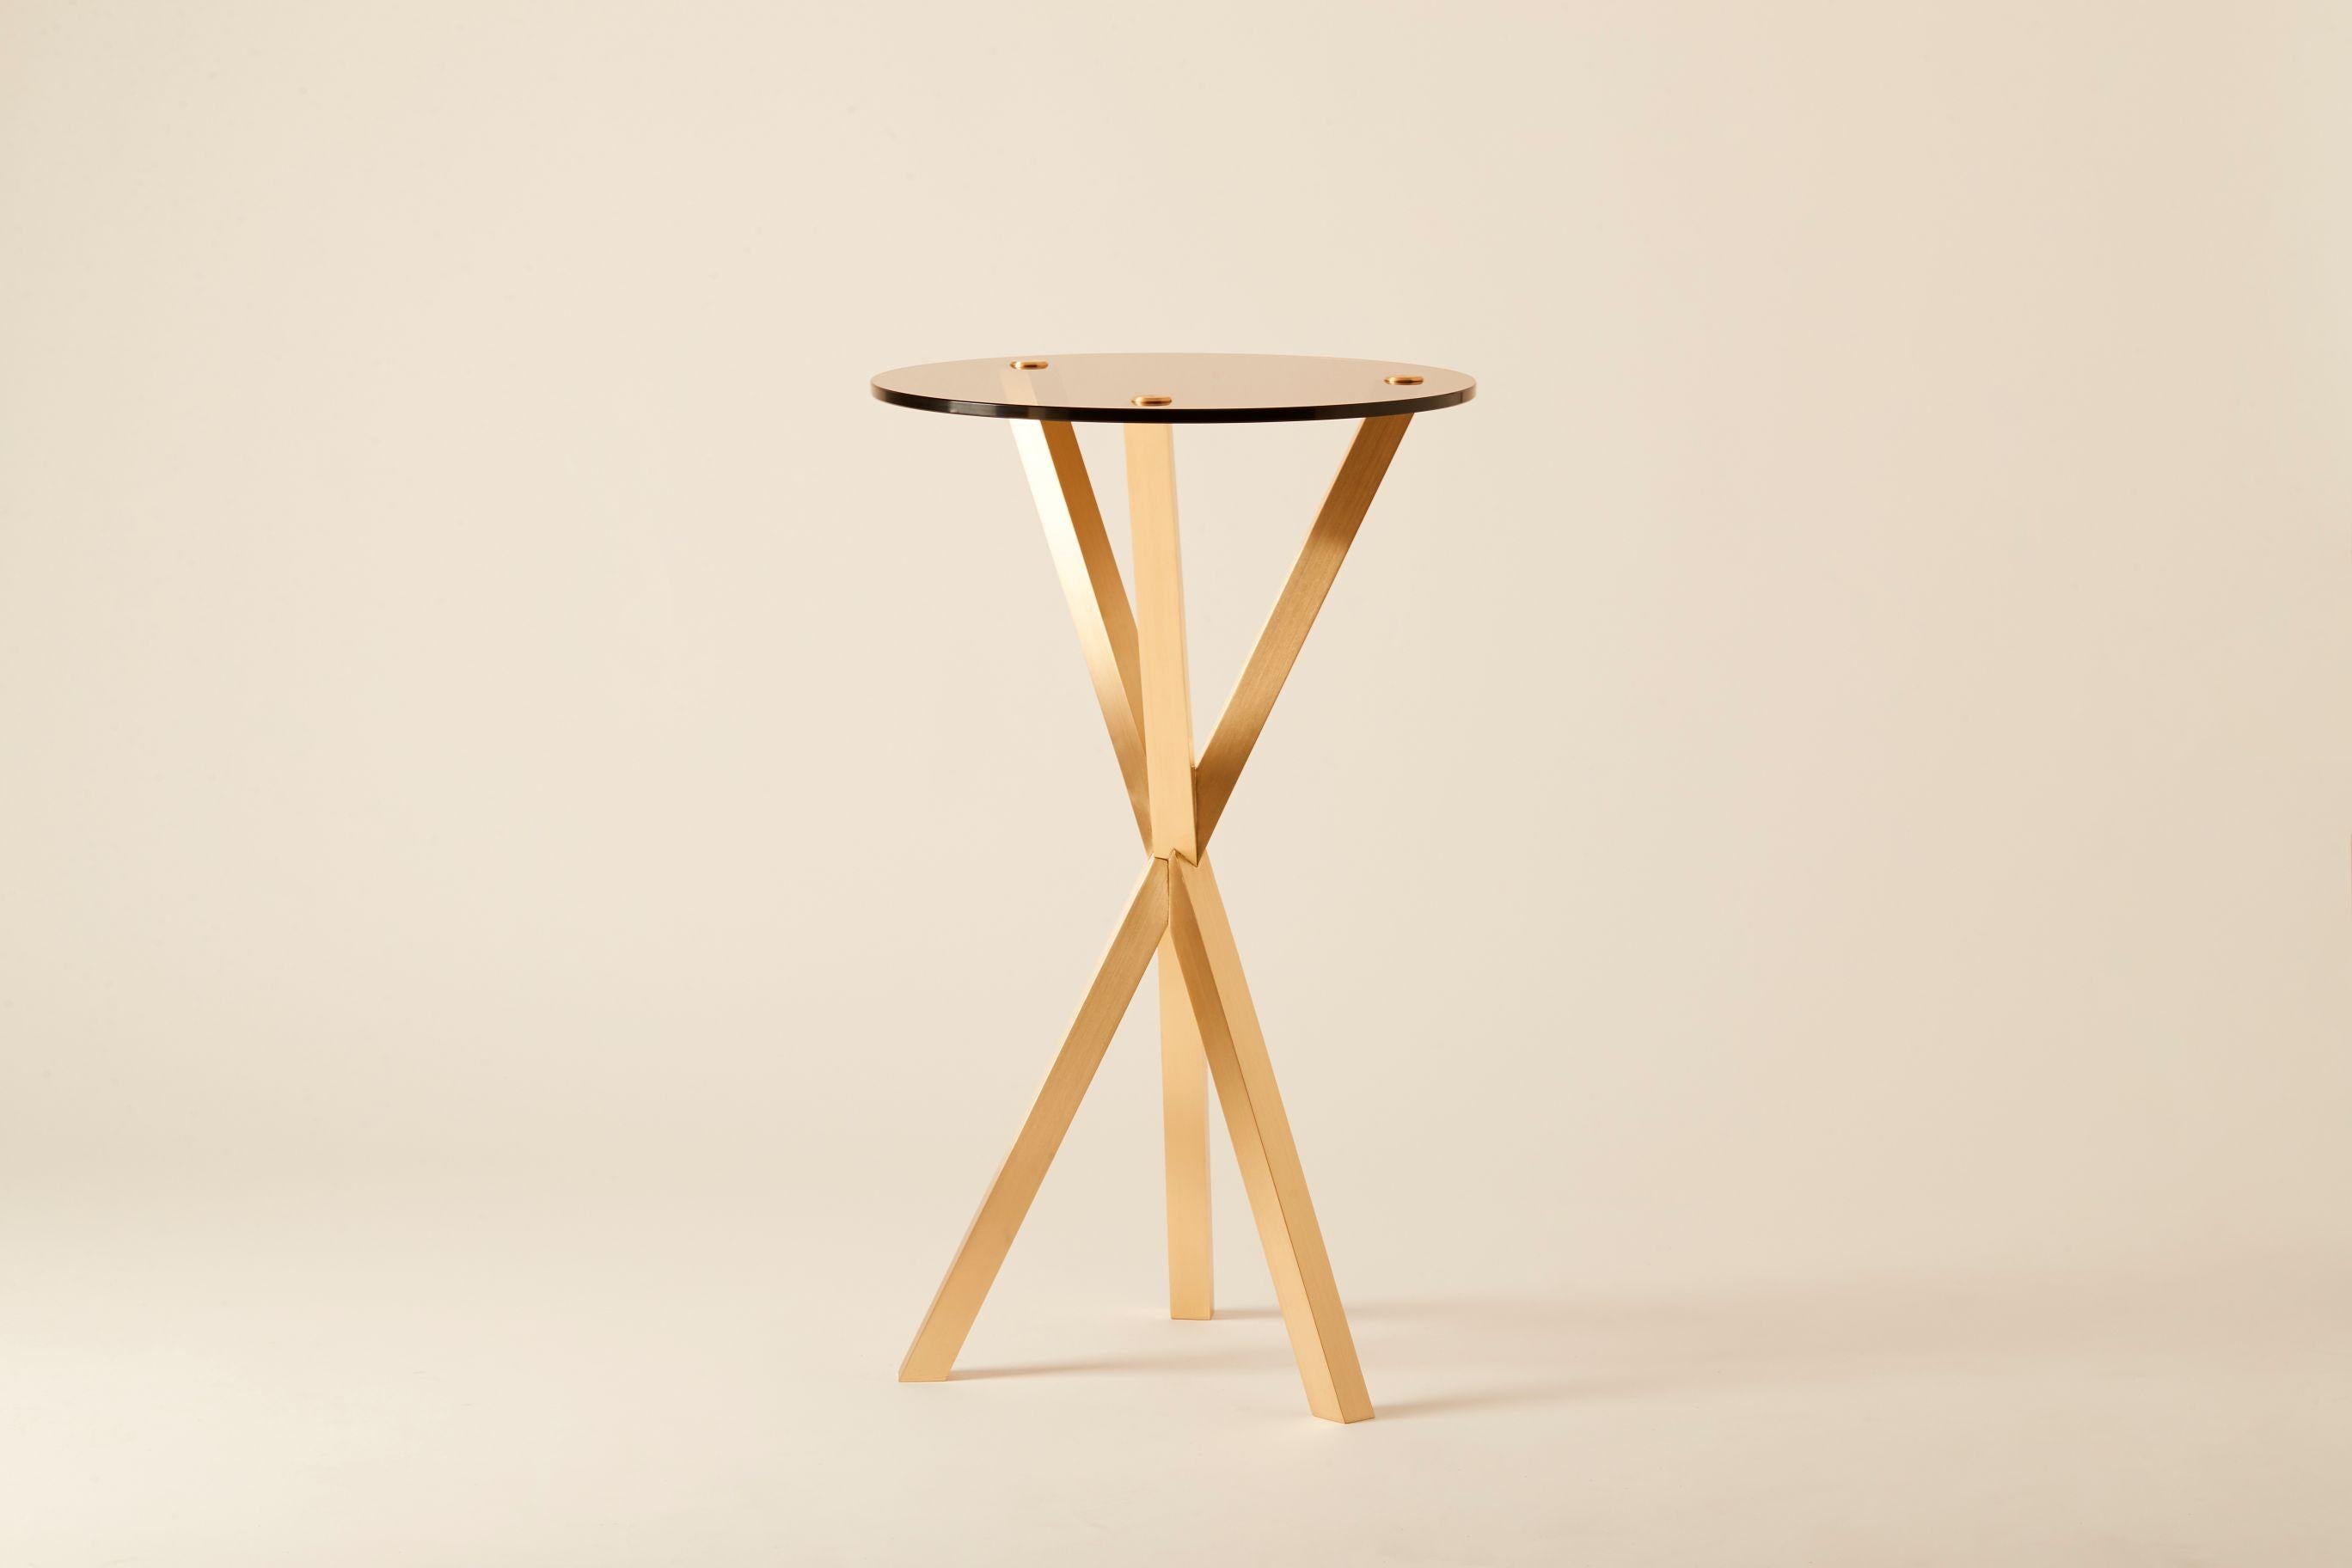 Glass phasme side table by Mydriaz
Dimensions: diameter 42 x height 70 cm
Materials: brass, glass
Finishes: golden-plated or varnished brushed brass, white nickel finish on brushed brass, black nickel finish on brushed brass
7 kg

Our products